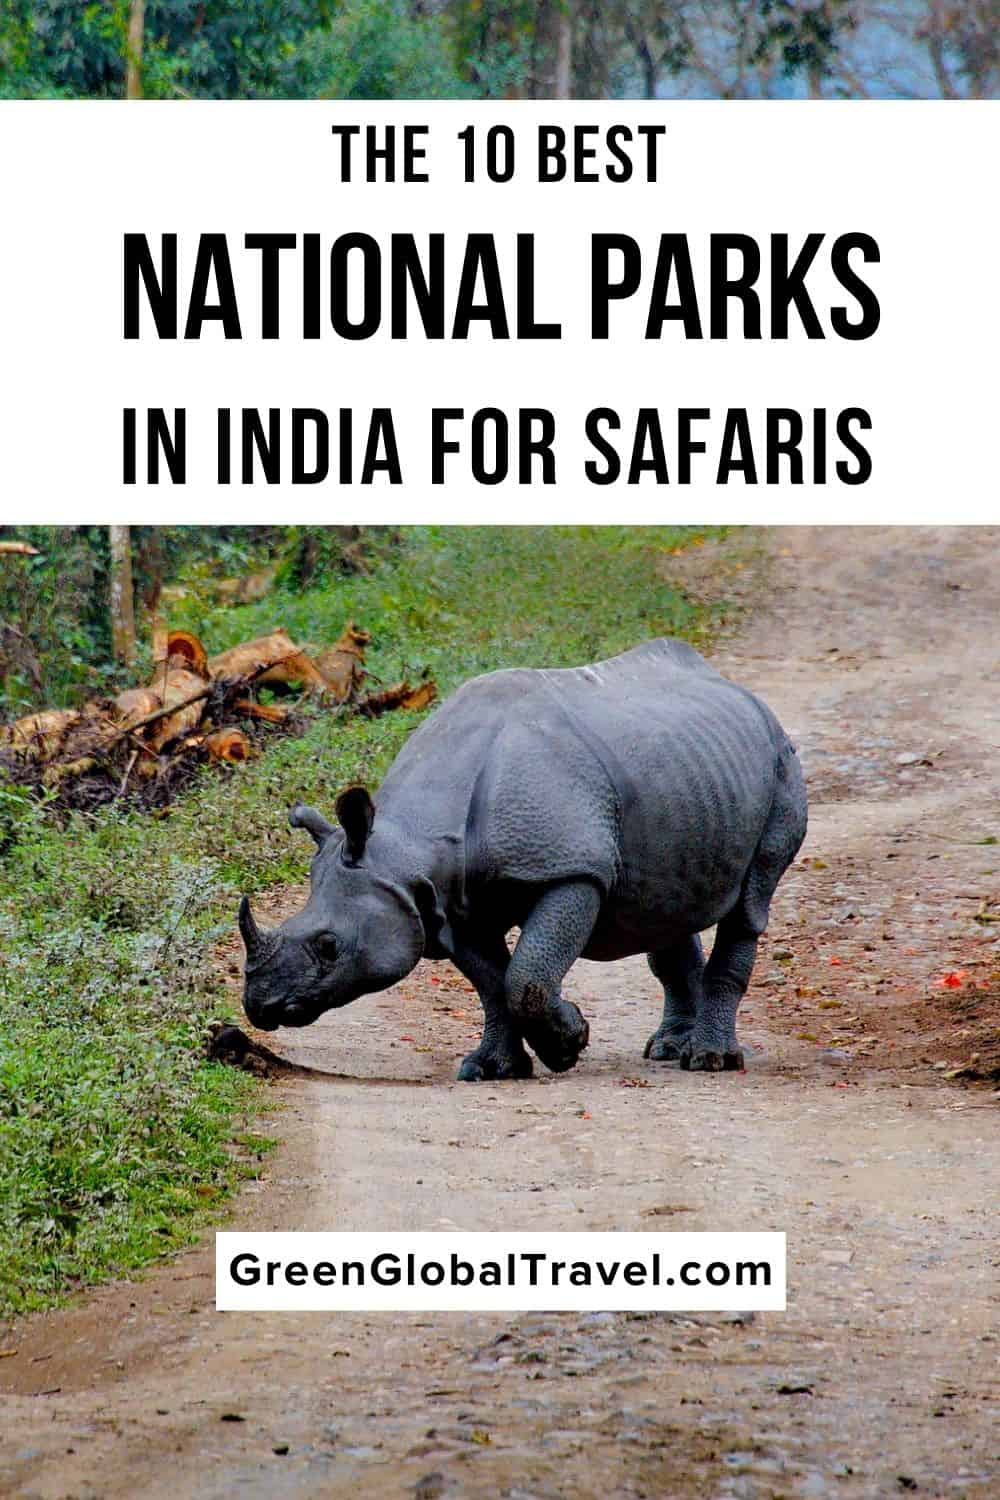 The Top 10 National Parks in India for Indian Safaris where you can see tigers, leopards, one horned rhinos, sloth bears, and more! | indian national park | important national parks in india | best national parks in india | famous national parks in india | best jungle safari in india | sanctuaries and national parks in india | best tiger reserve in india | best tiger safari in india | best park in india